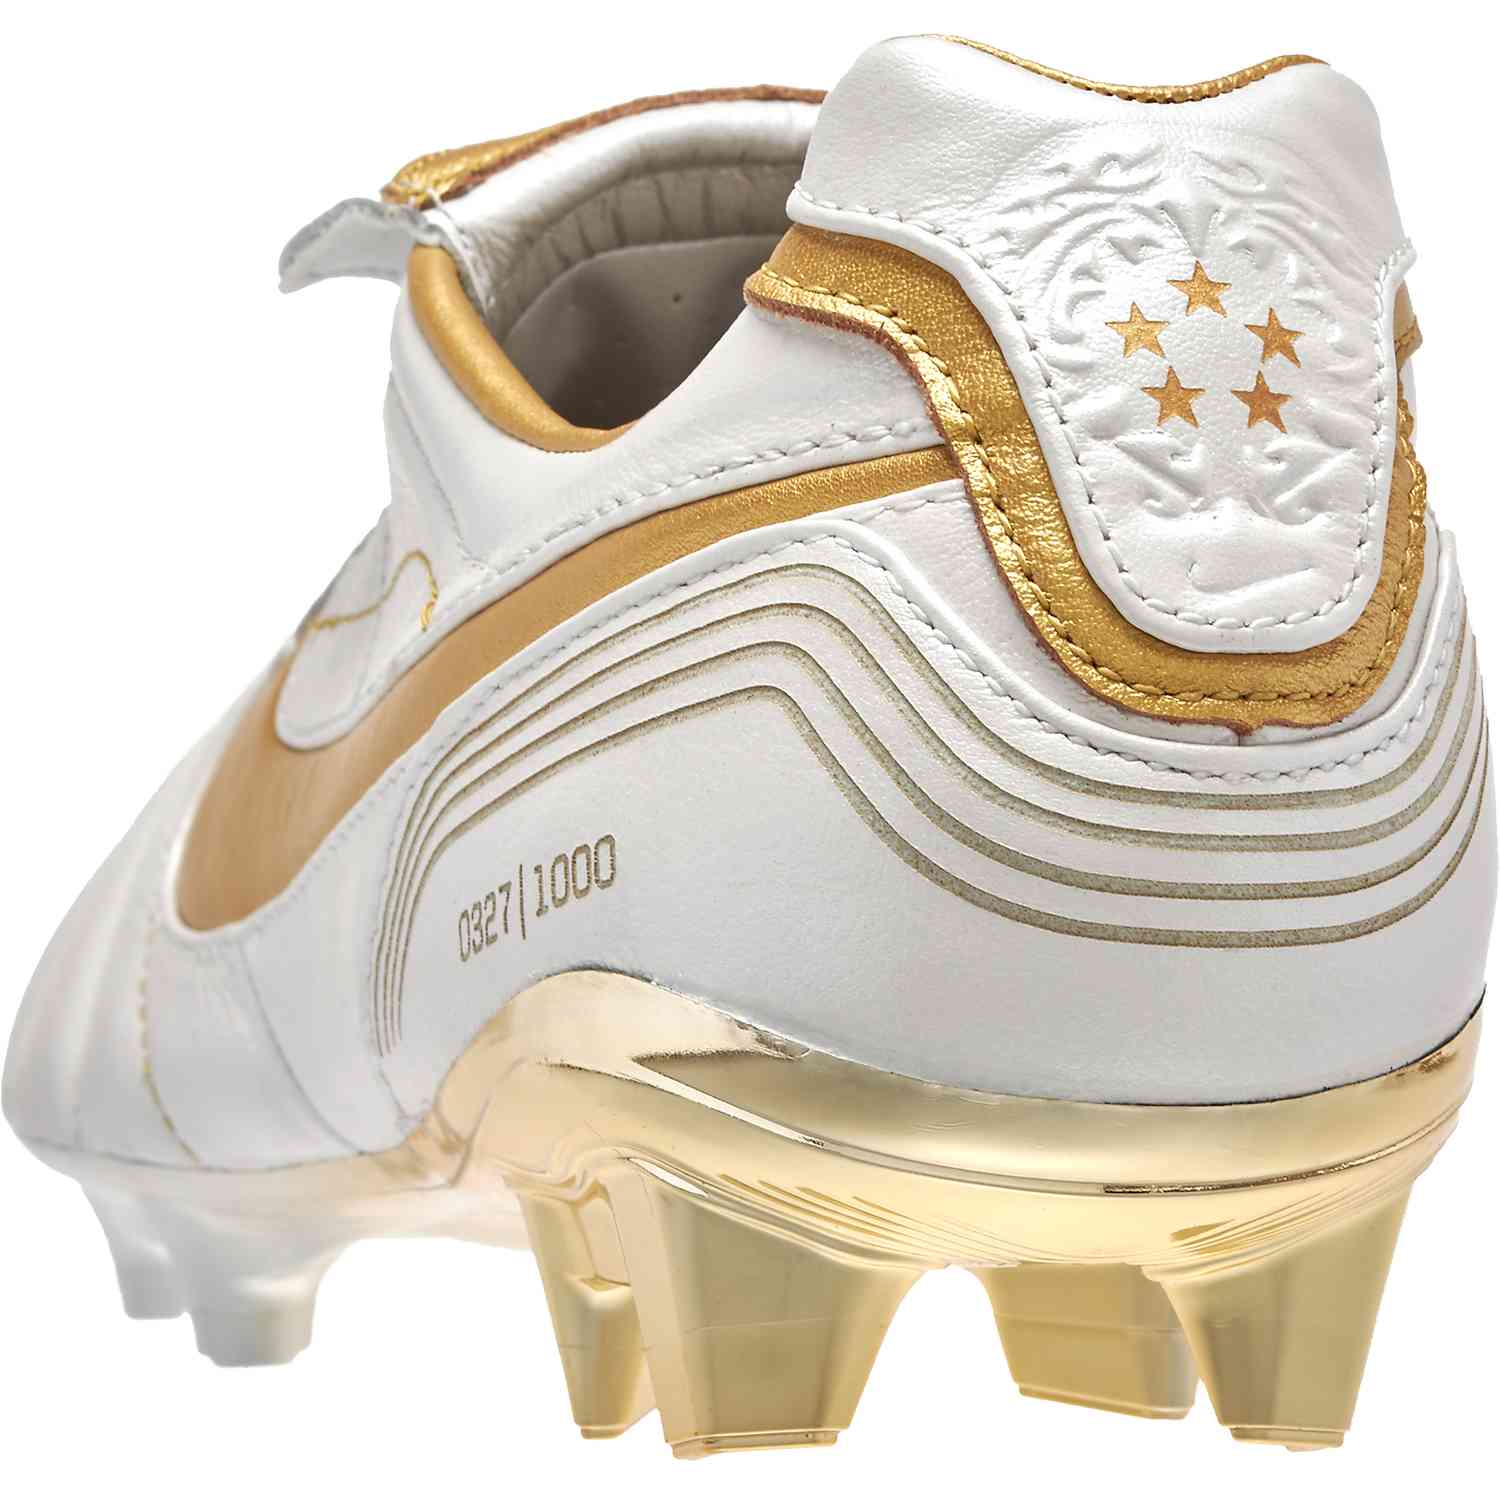 ronaldinho cleats white and gold